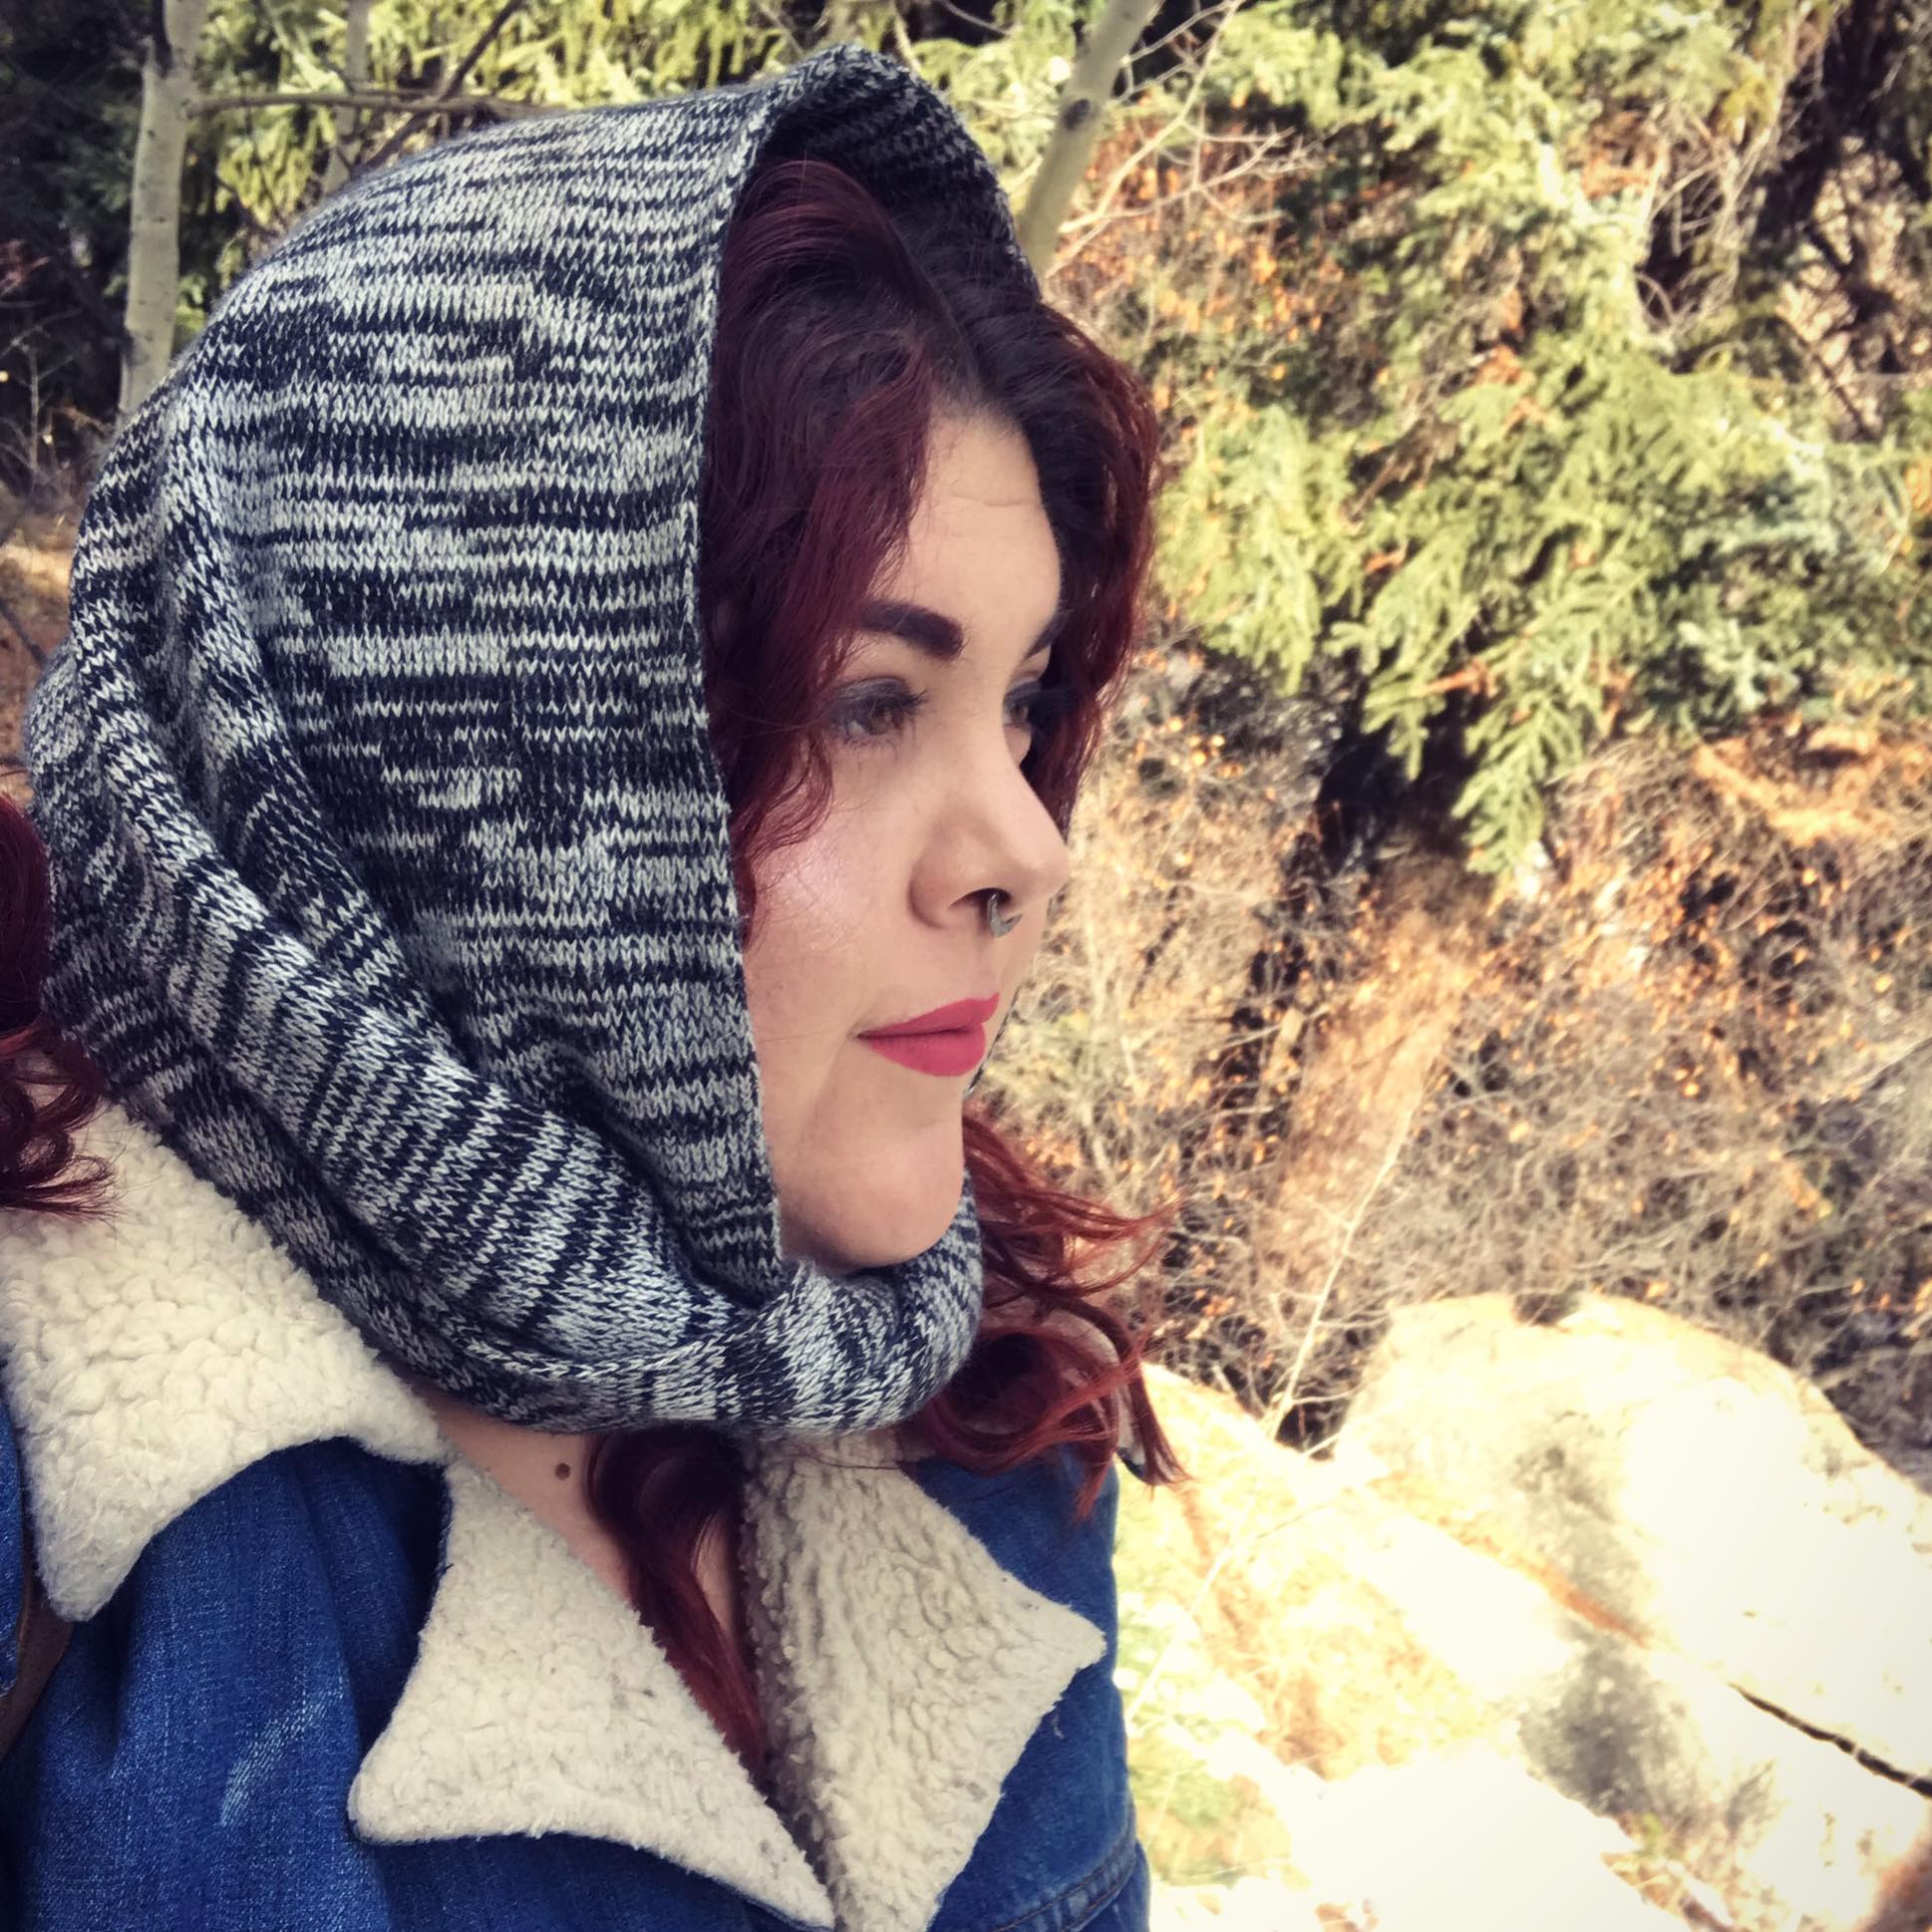 Author Victoria Parra looks to the right, red hair covered in a black and grey scarf. She is standing in front of trees.